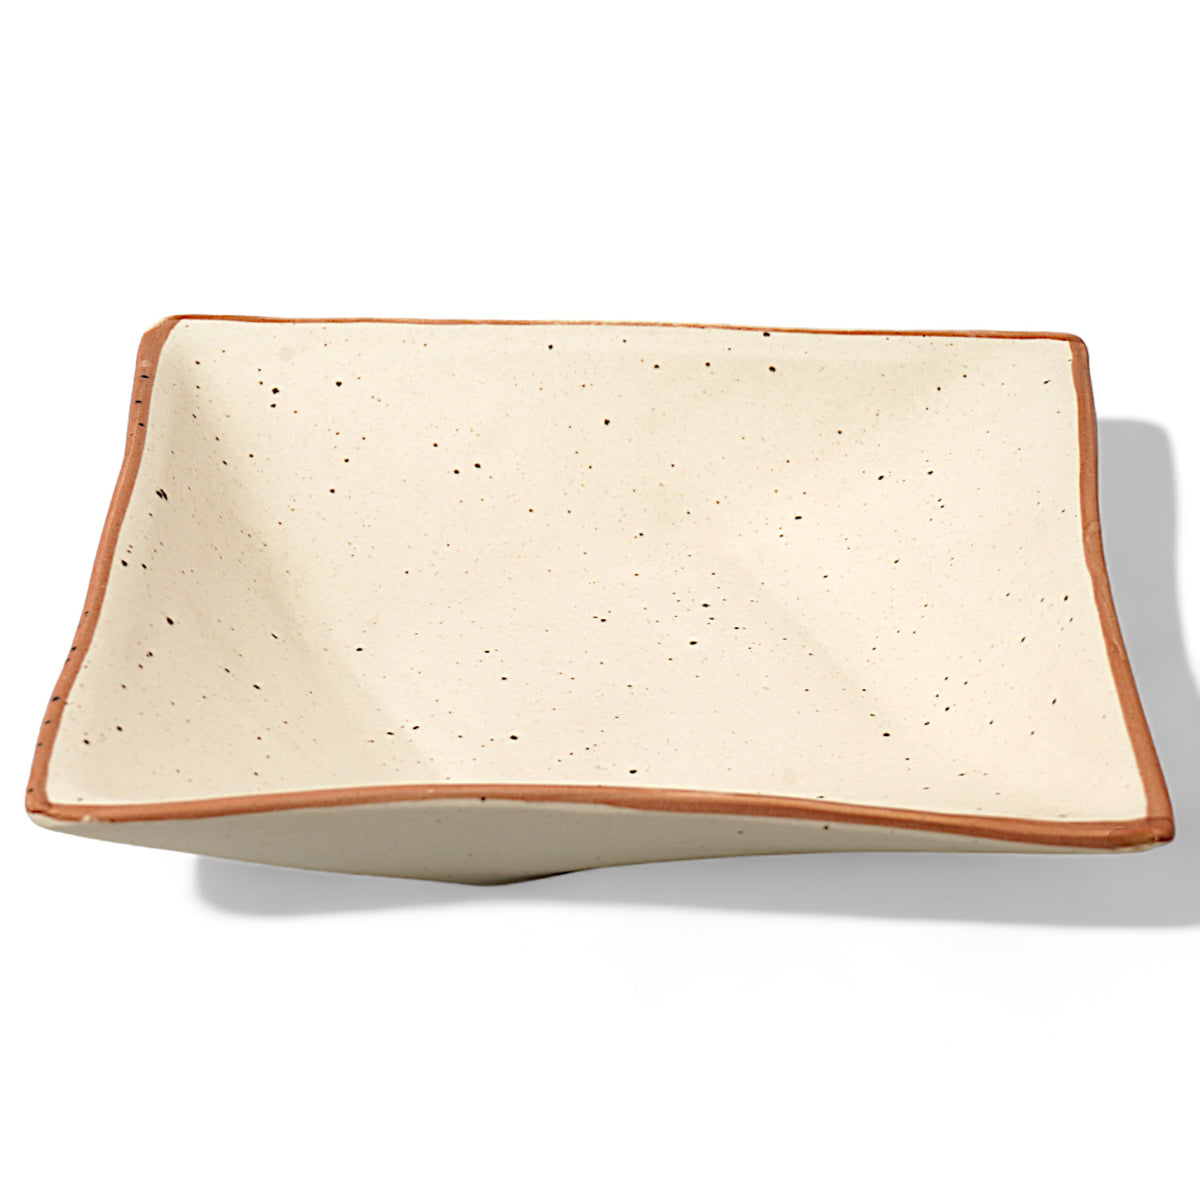 Claymistry Ceramic Snacks Square Shaped Serving Tray | 21cm * 21cm * 3cm | Matte Finish | Dishwasher, Oven & Microwave Safe | Biscuits, Namkeen, Chips, Sweets Tray | Premium Kitchen Crockery